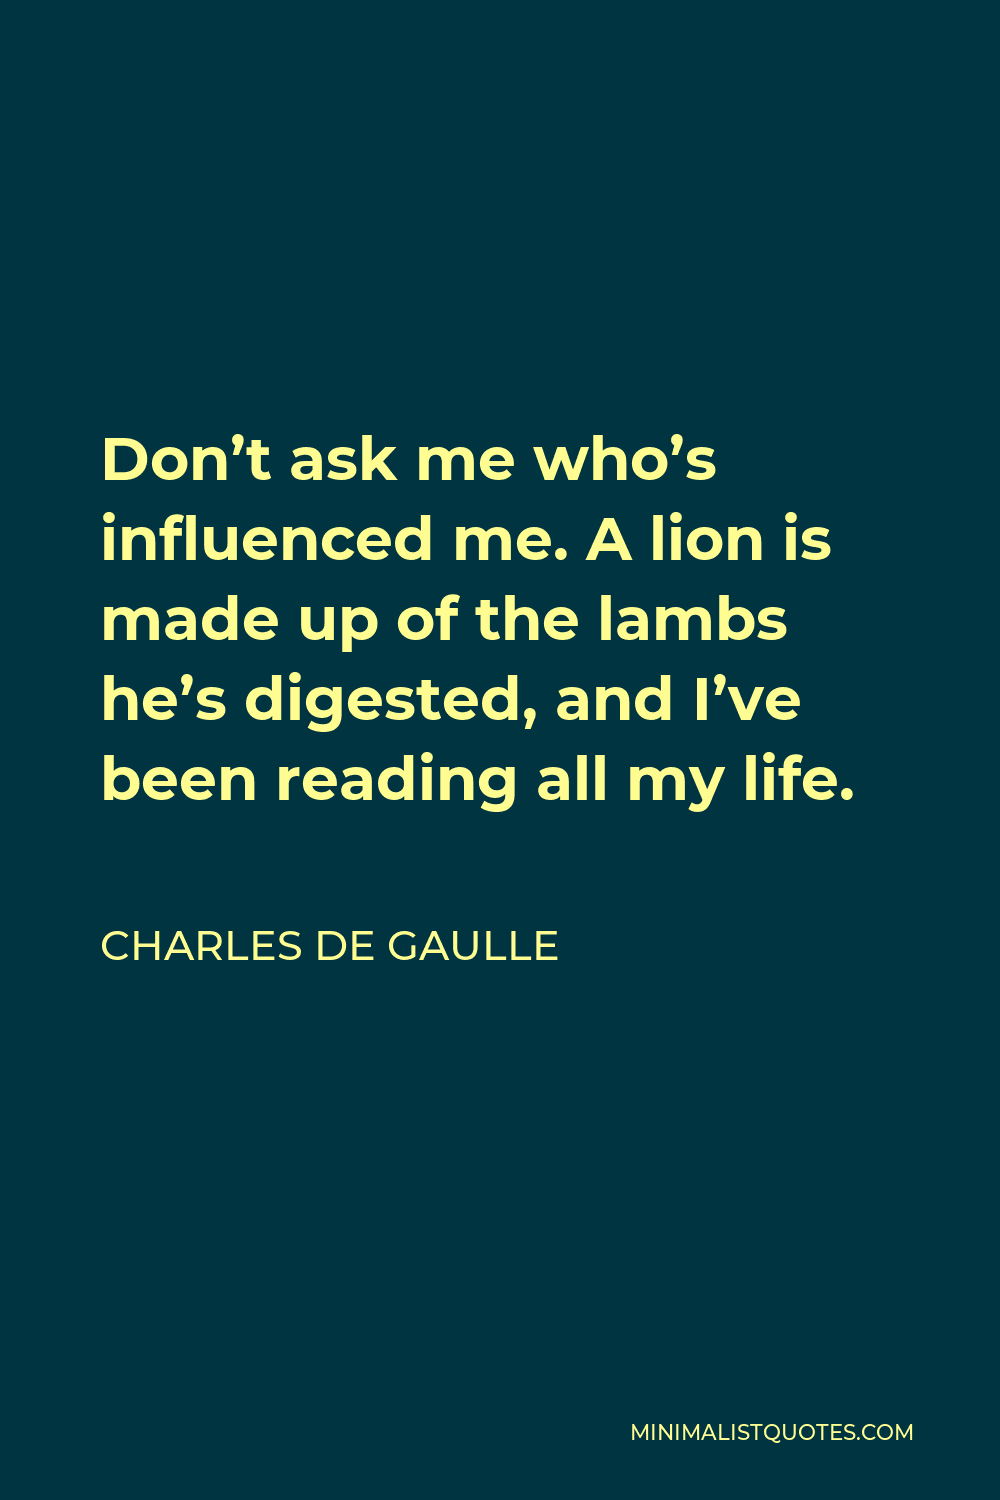 Charles de Gaulle Quote - Don’t ask me who’s influenced me. A lion is made up of the lambs he’s digested, and I’ve been reading all my life.